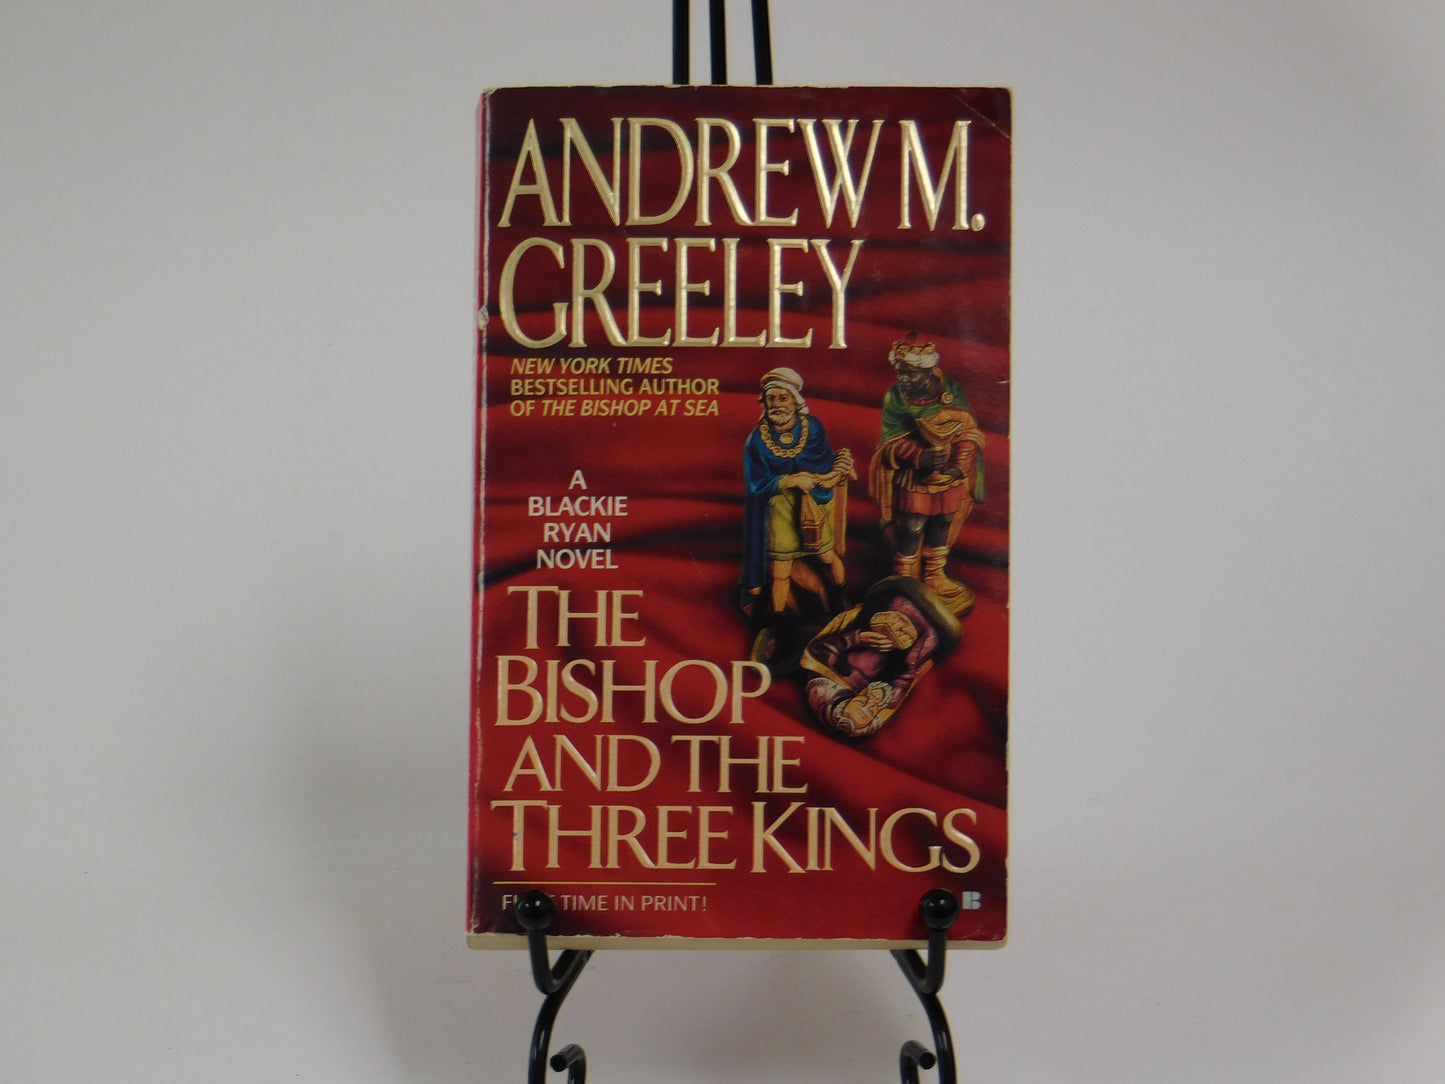 The Bishop and the Three Kings by Andrew M. Greeley